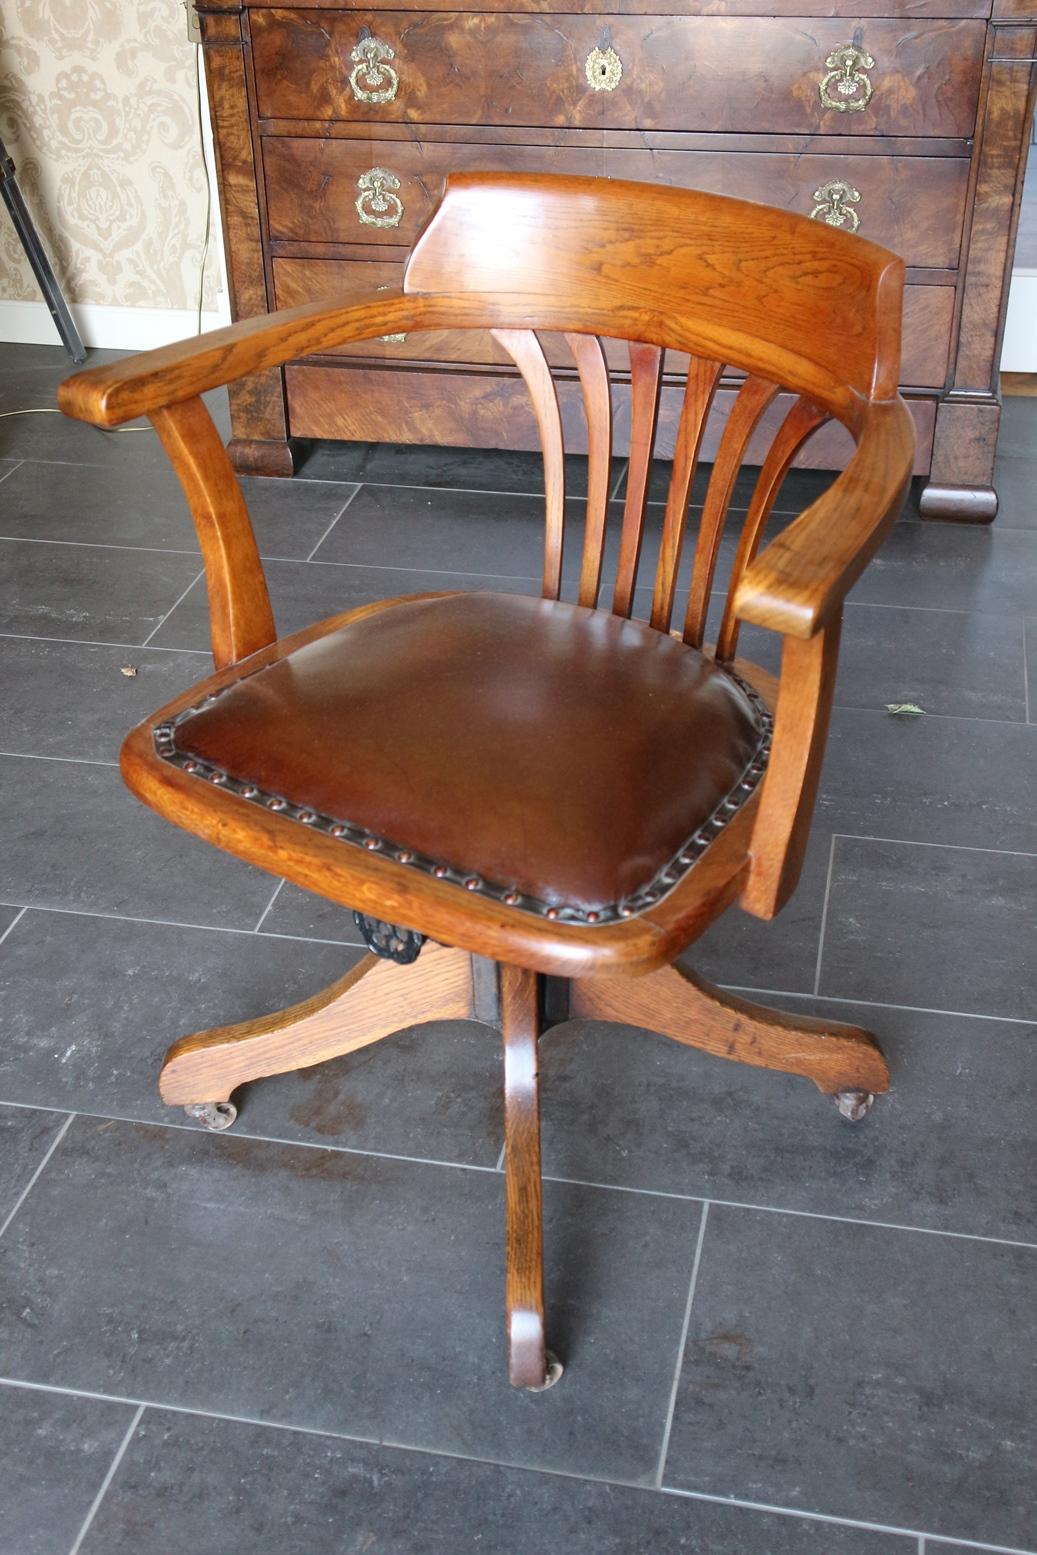 Antique oak office chair in original condition. The chair has seat-height adjustment and a rocking mechanism. Can be equipped with smooth rolling casters, especially for parquet flooring, instead of the original iron casters that are on now.